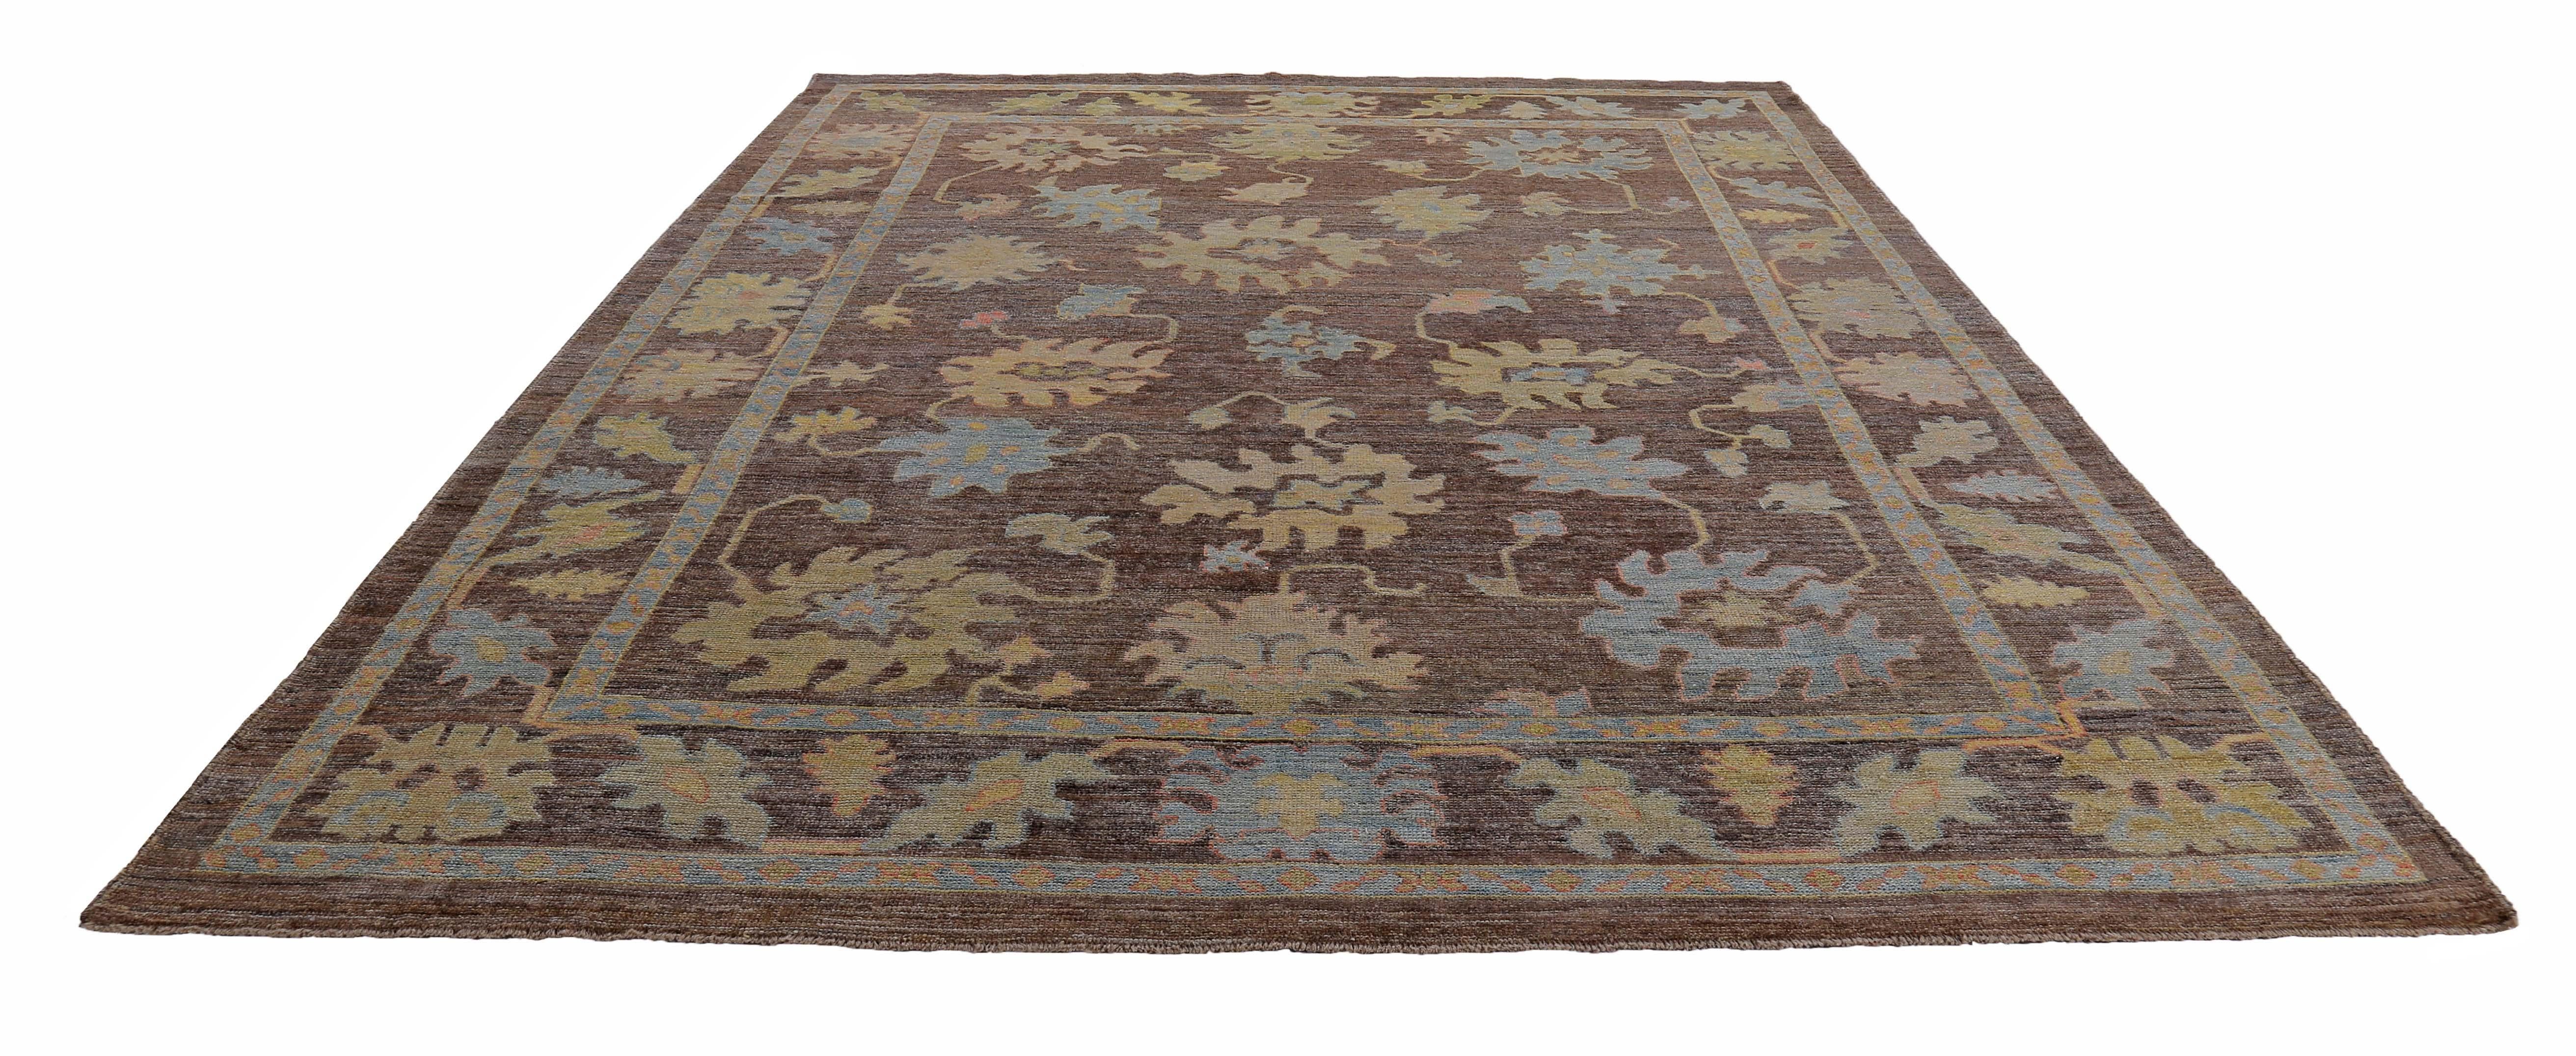 Turkish rug made of handwoven sheep’s wool of the finest quality. It’s colored with organic vegetable dyes that are certified safe for humans and pets alike. It features blue orange and green flower heads on a beautiful brown field. Flower patterns